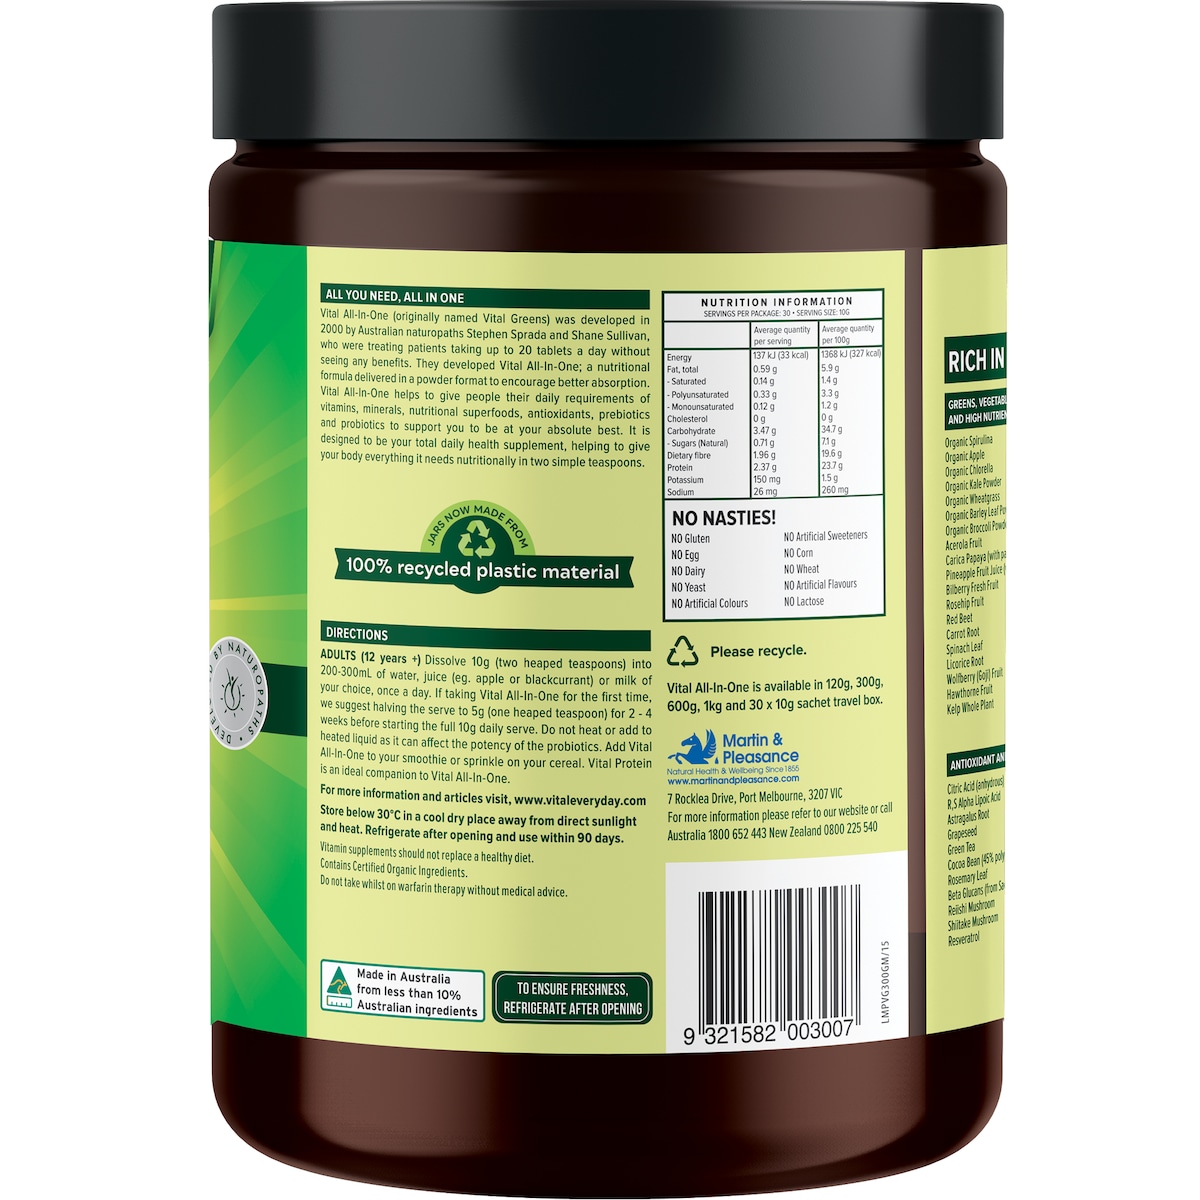 Vital All-In-One Daily Health Supplement Powder 300G